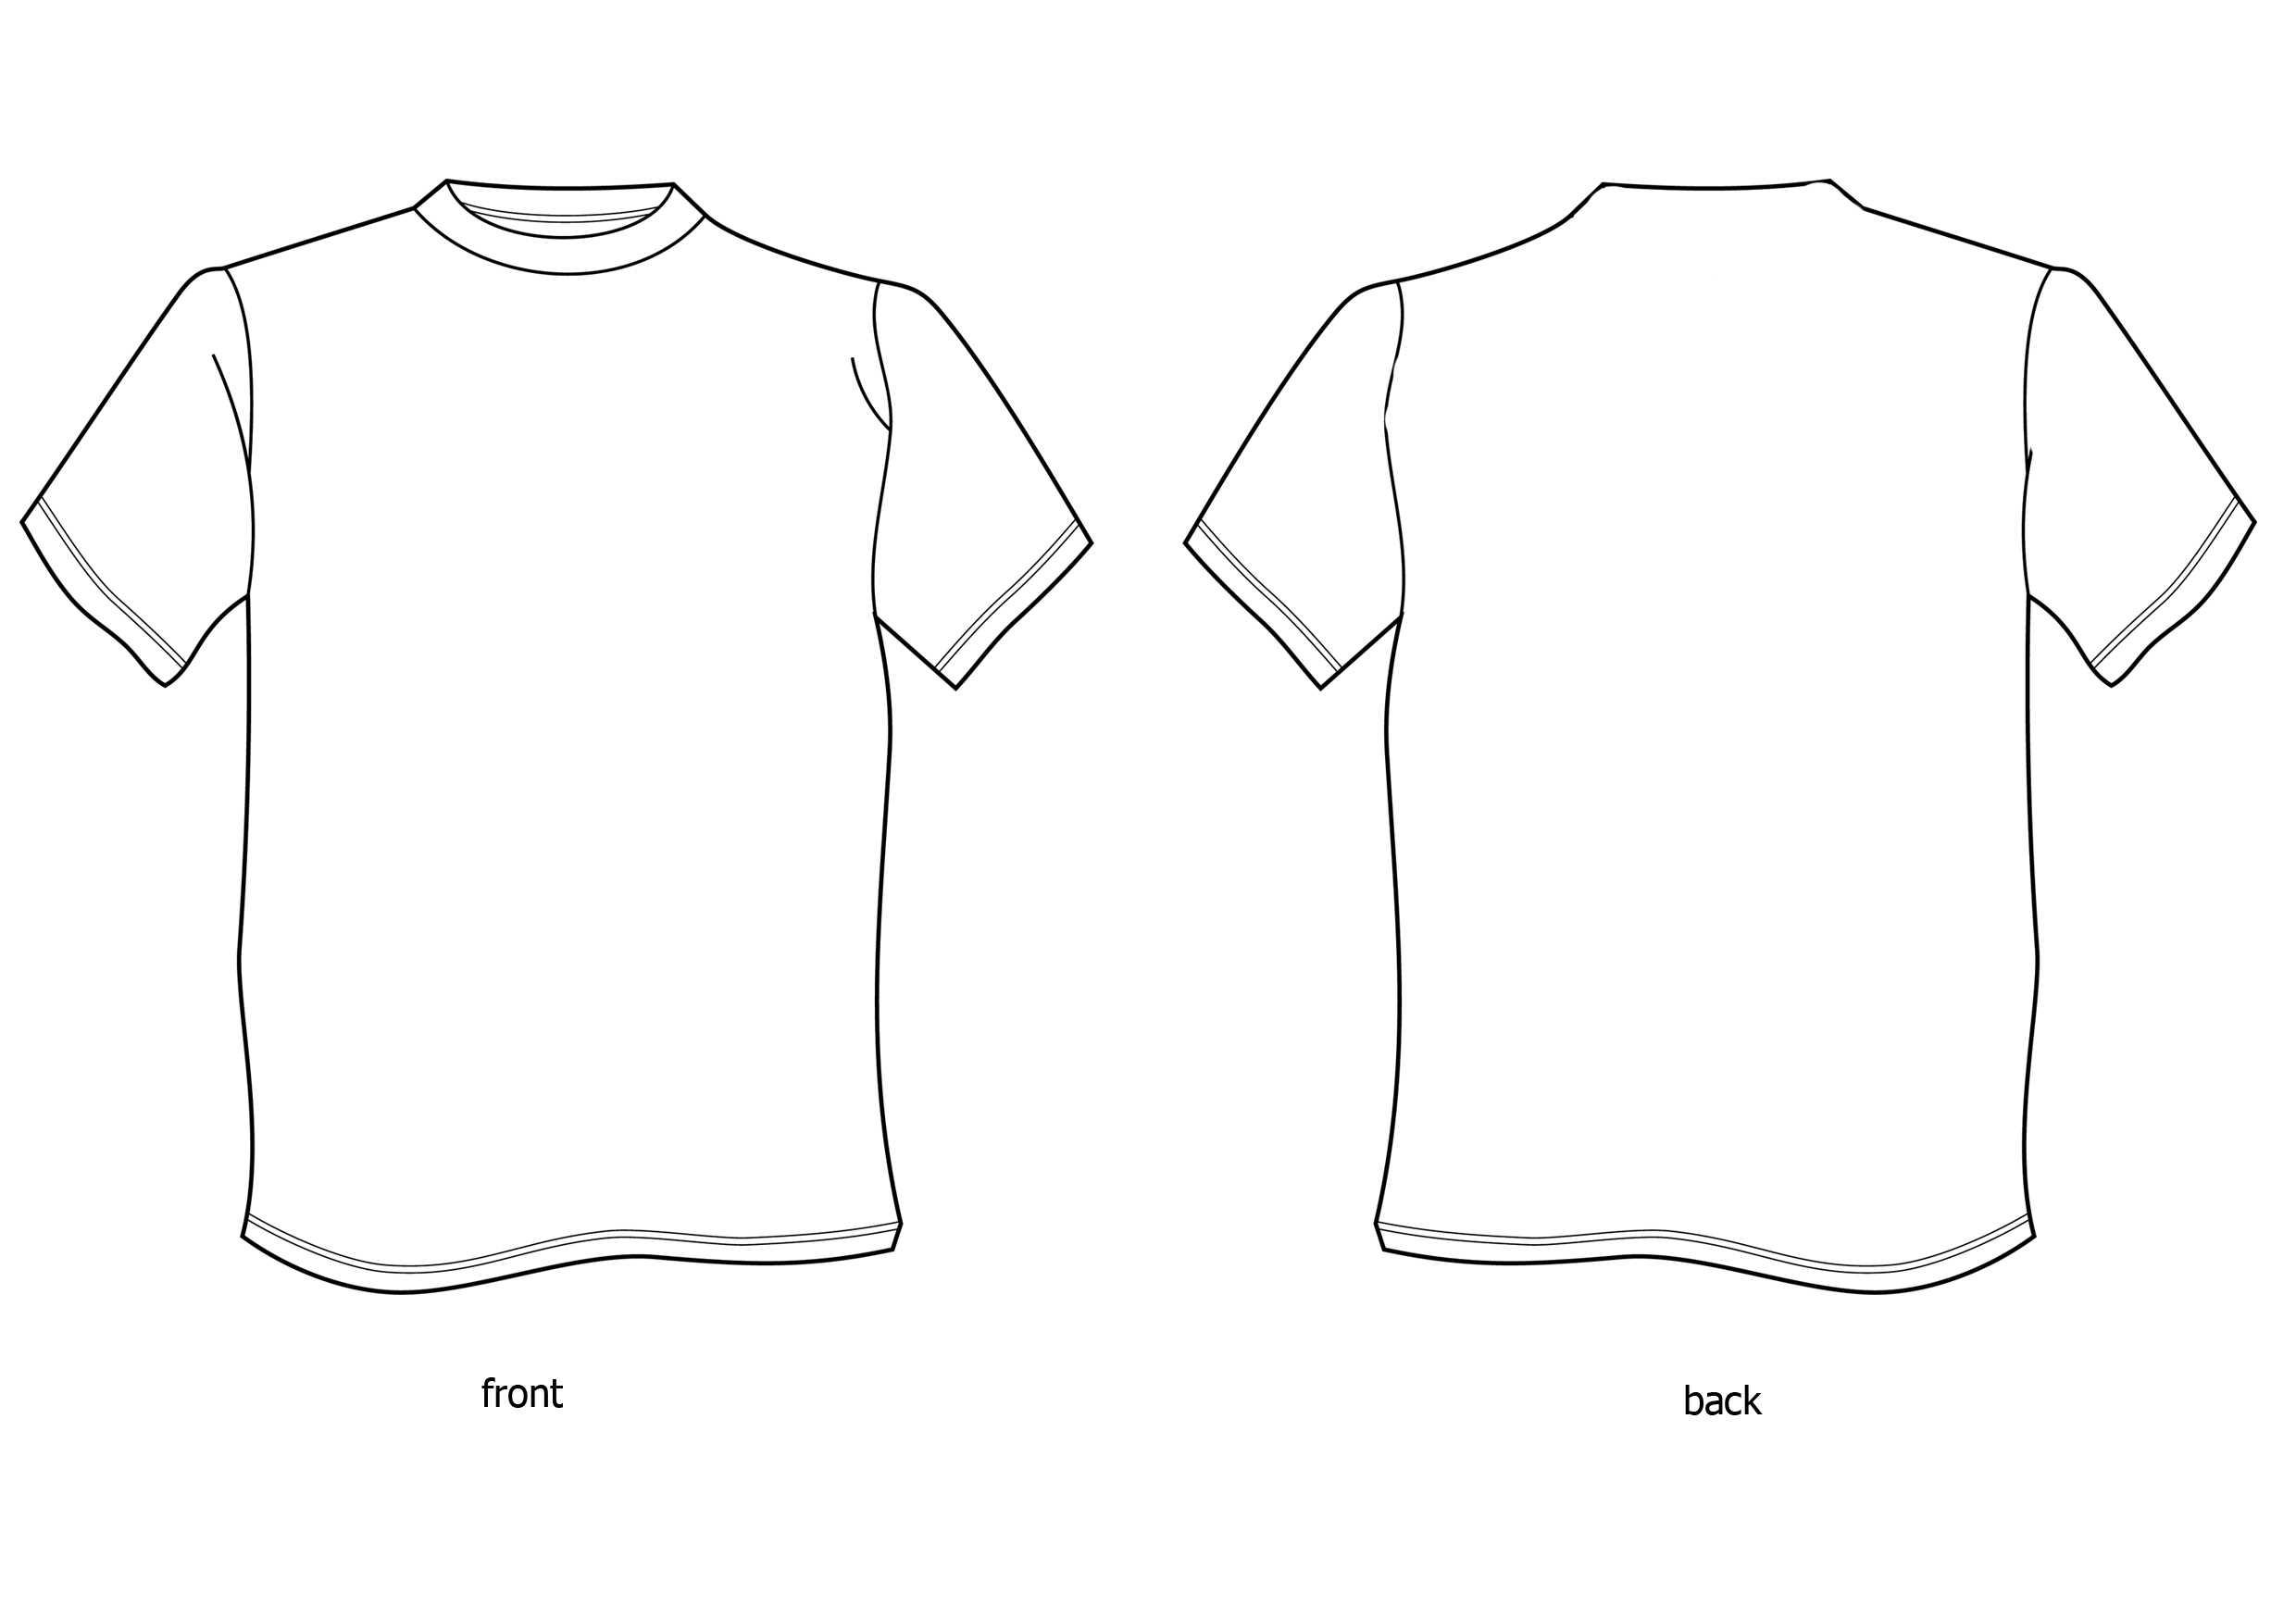 Free T Shirt Design Template, Download Free Clip Art, Free Intended For Blank T Shirt Design Template Psd